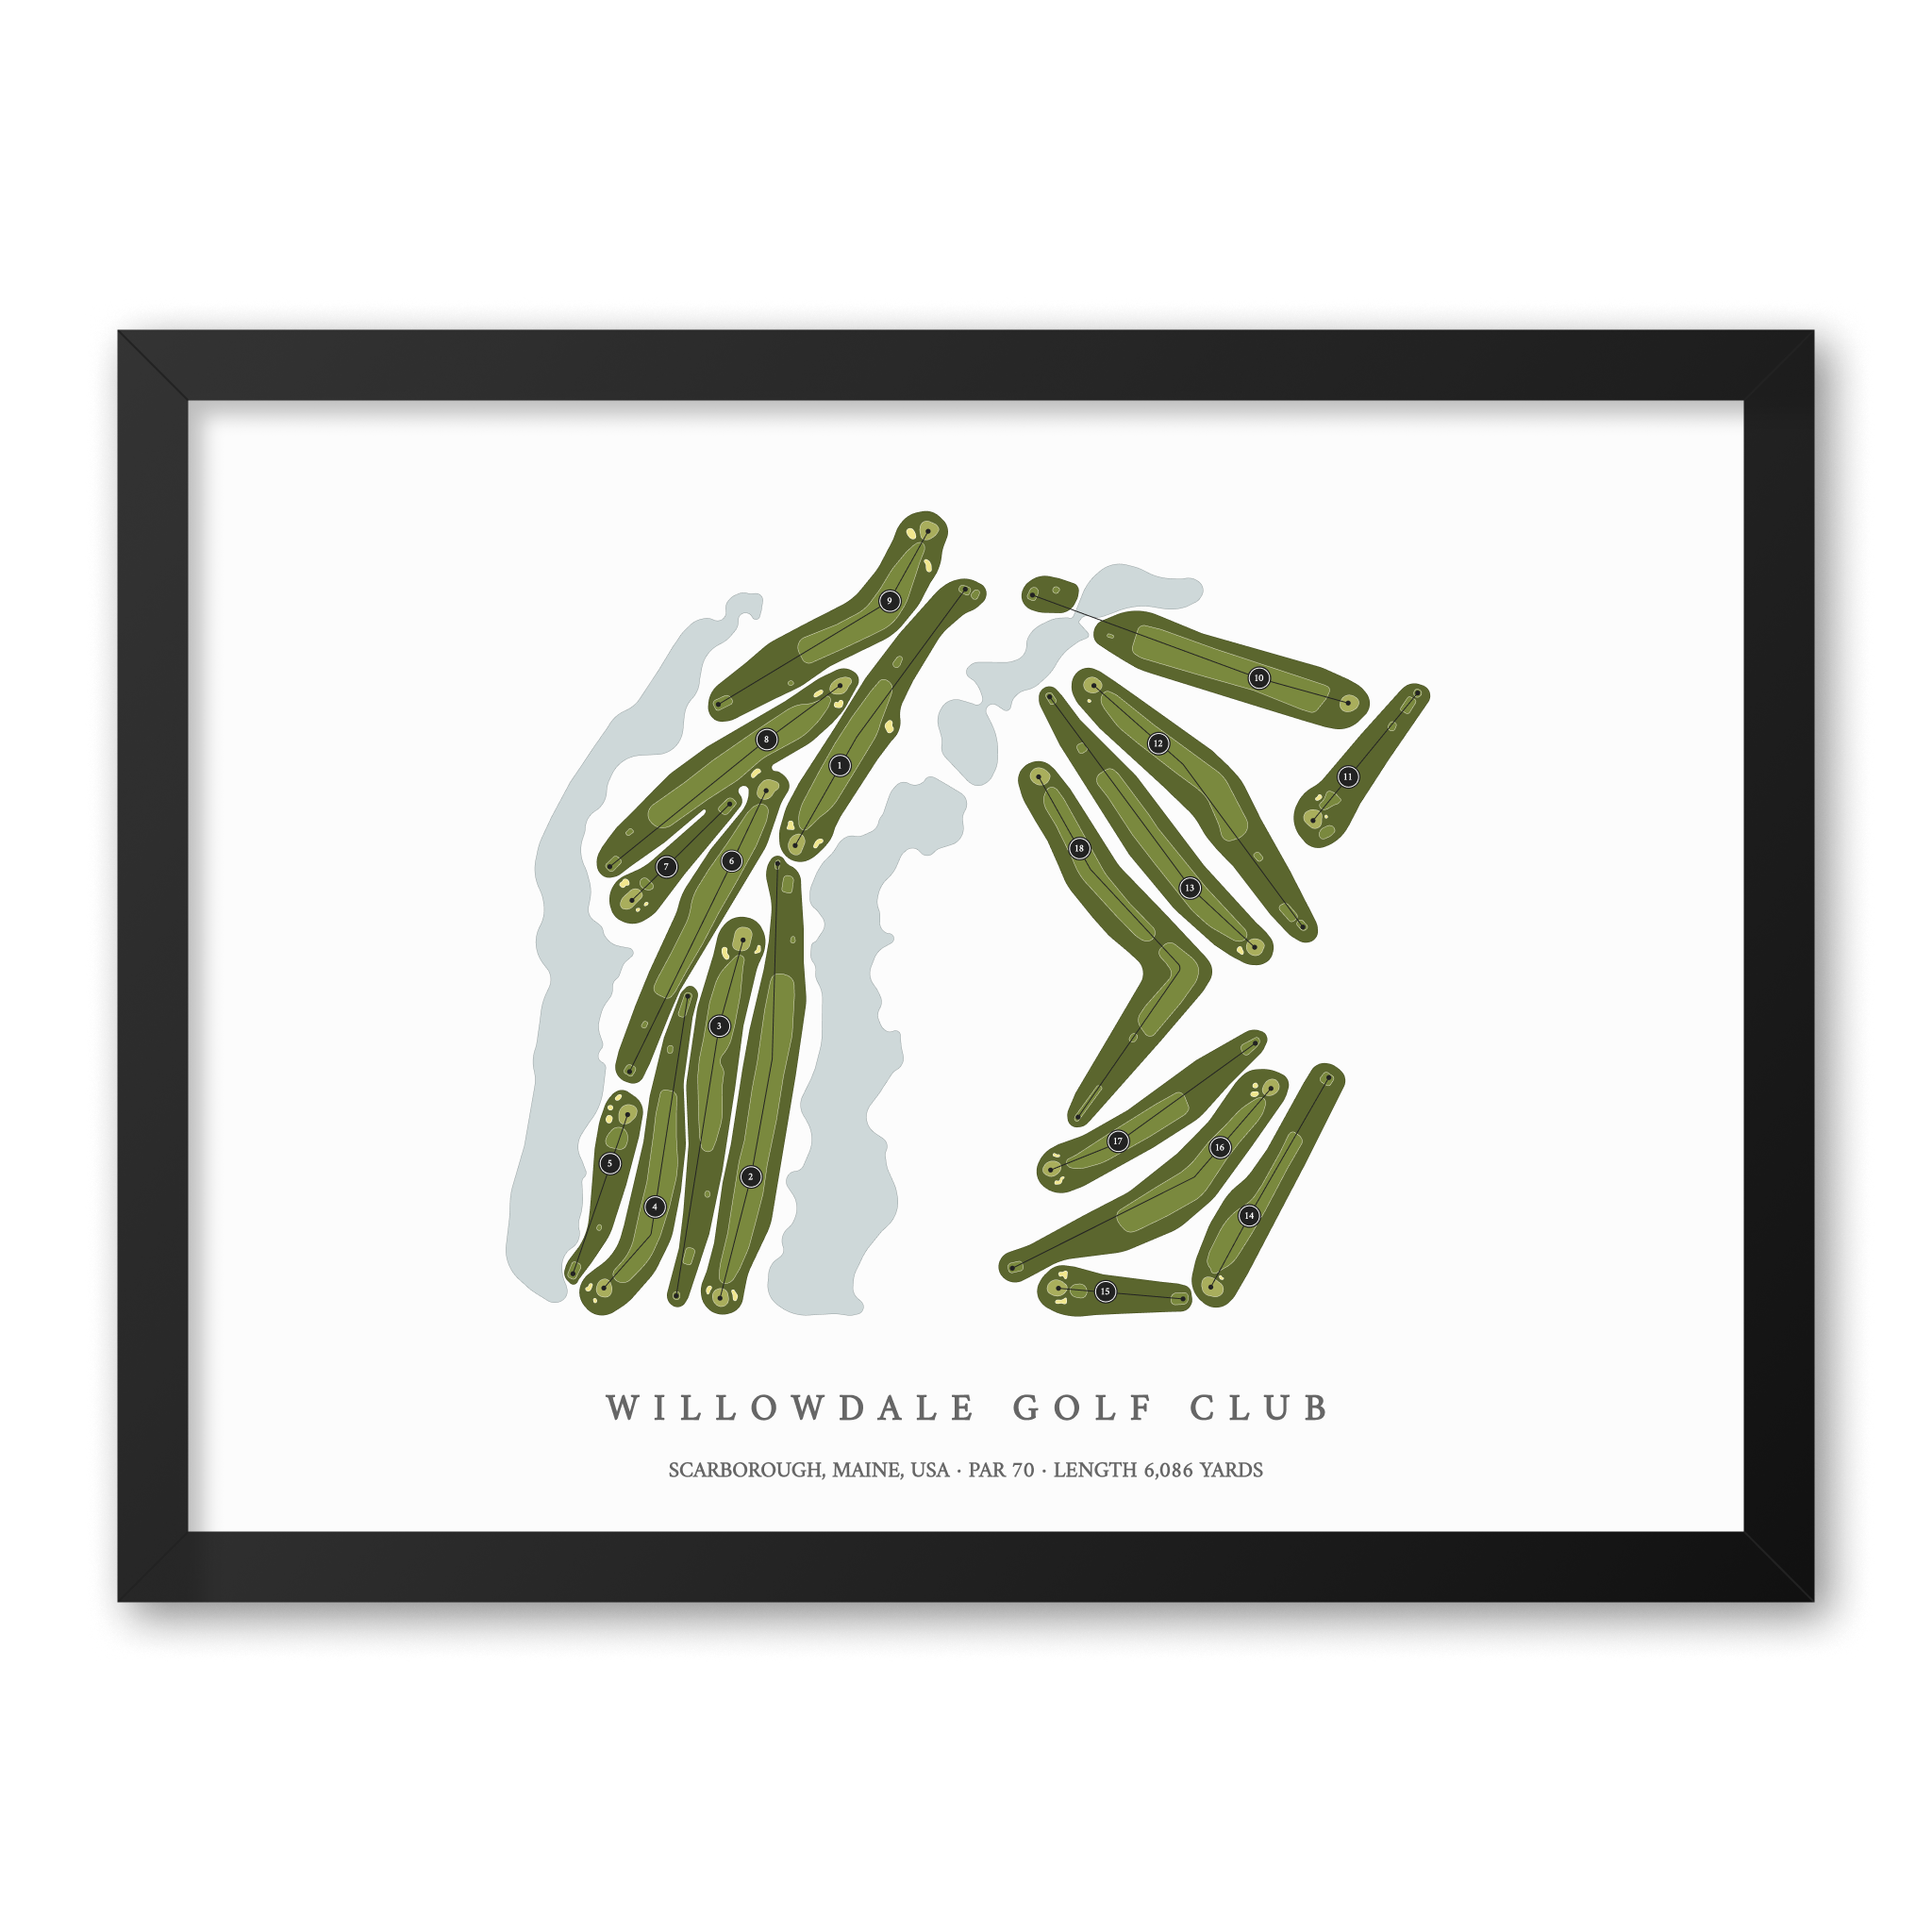 Willowdale Golf Club | Golf Course Map | Black Frame